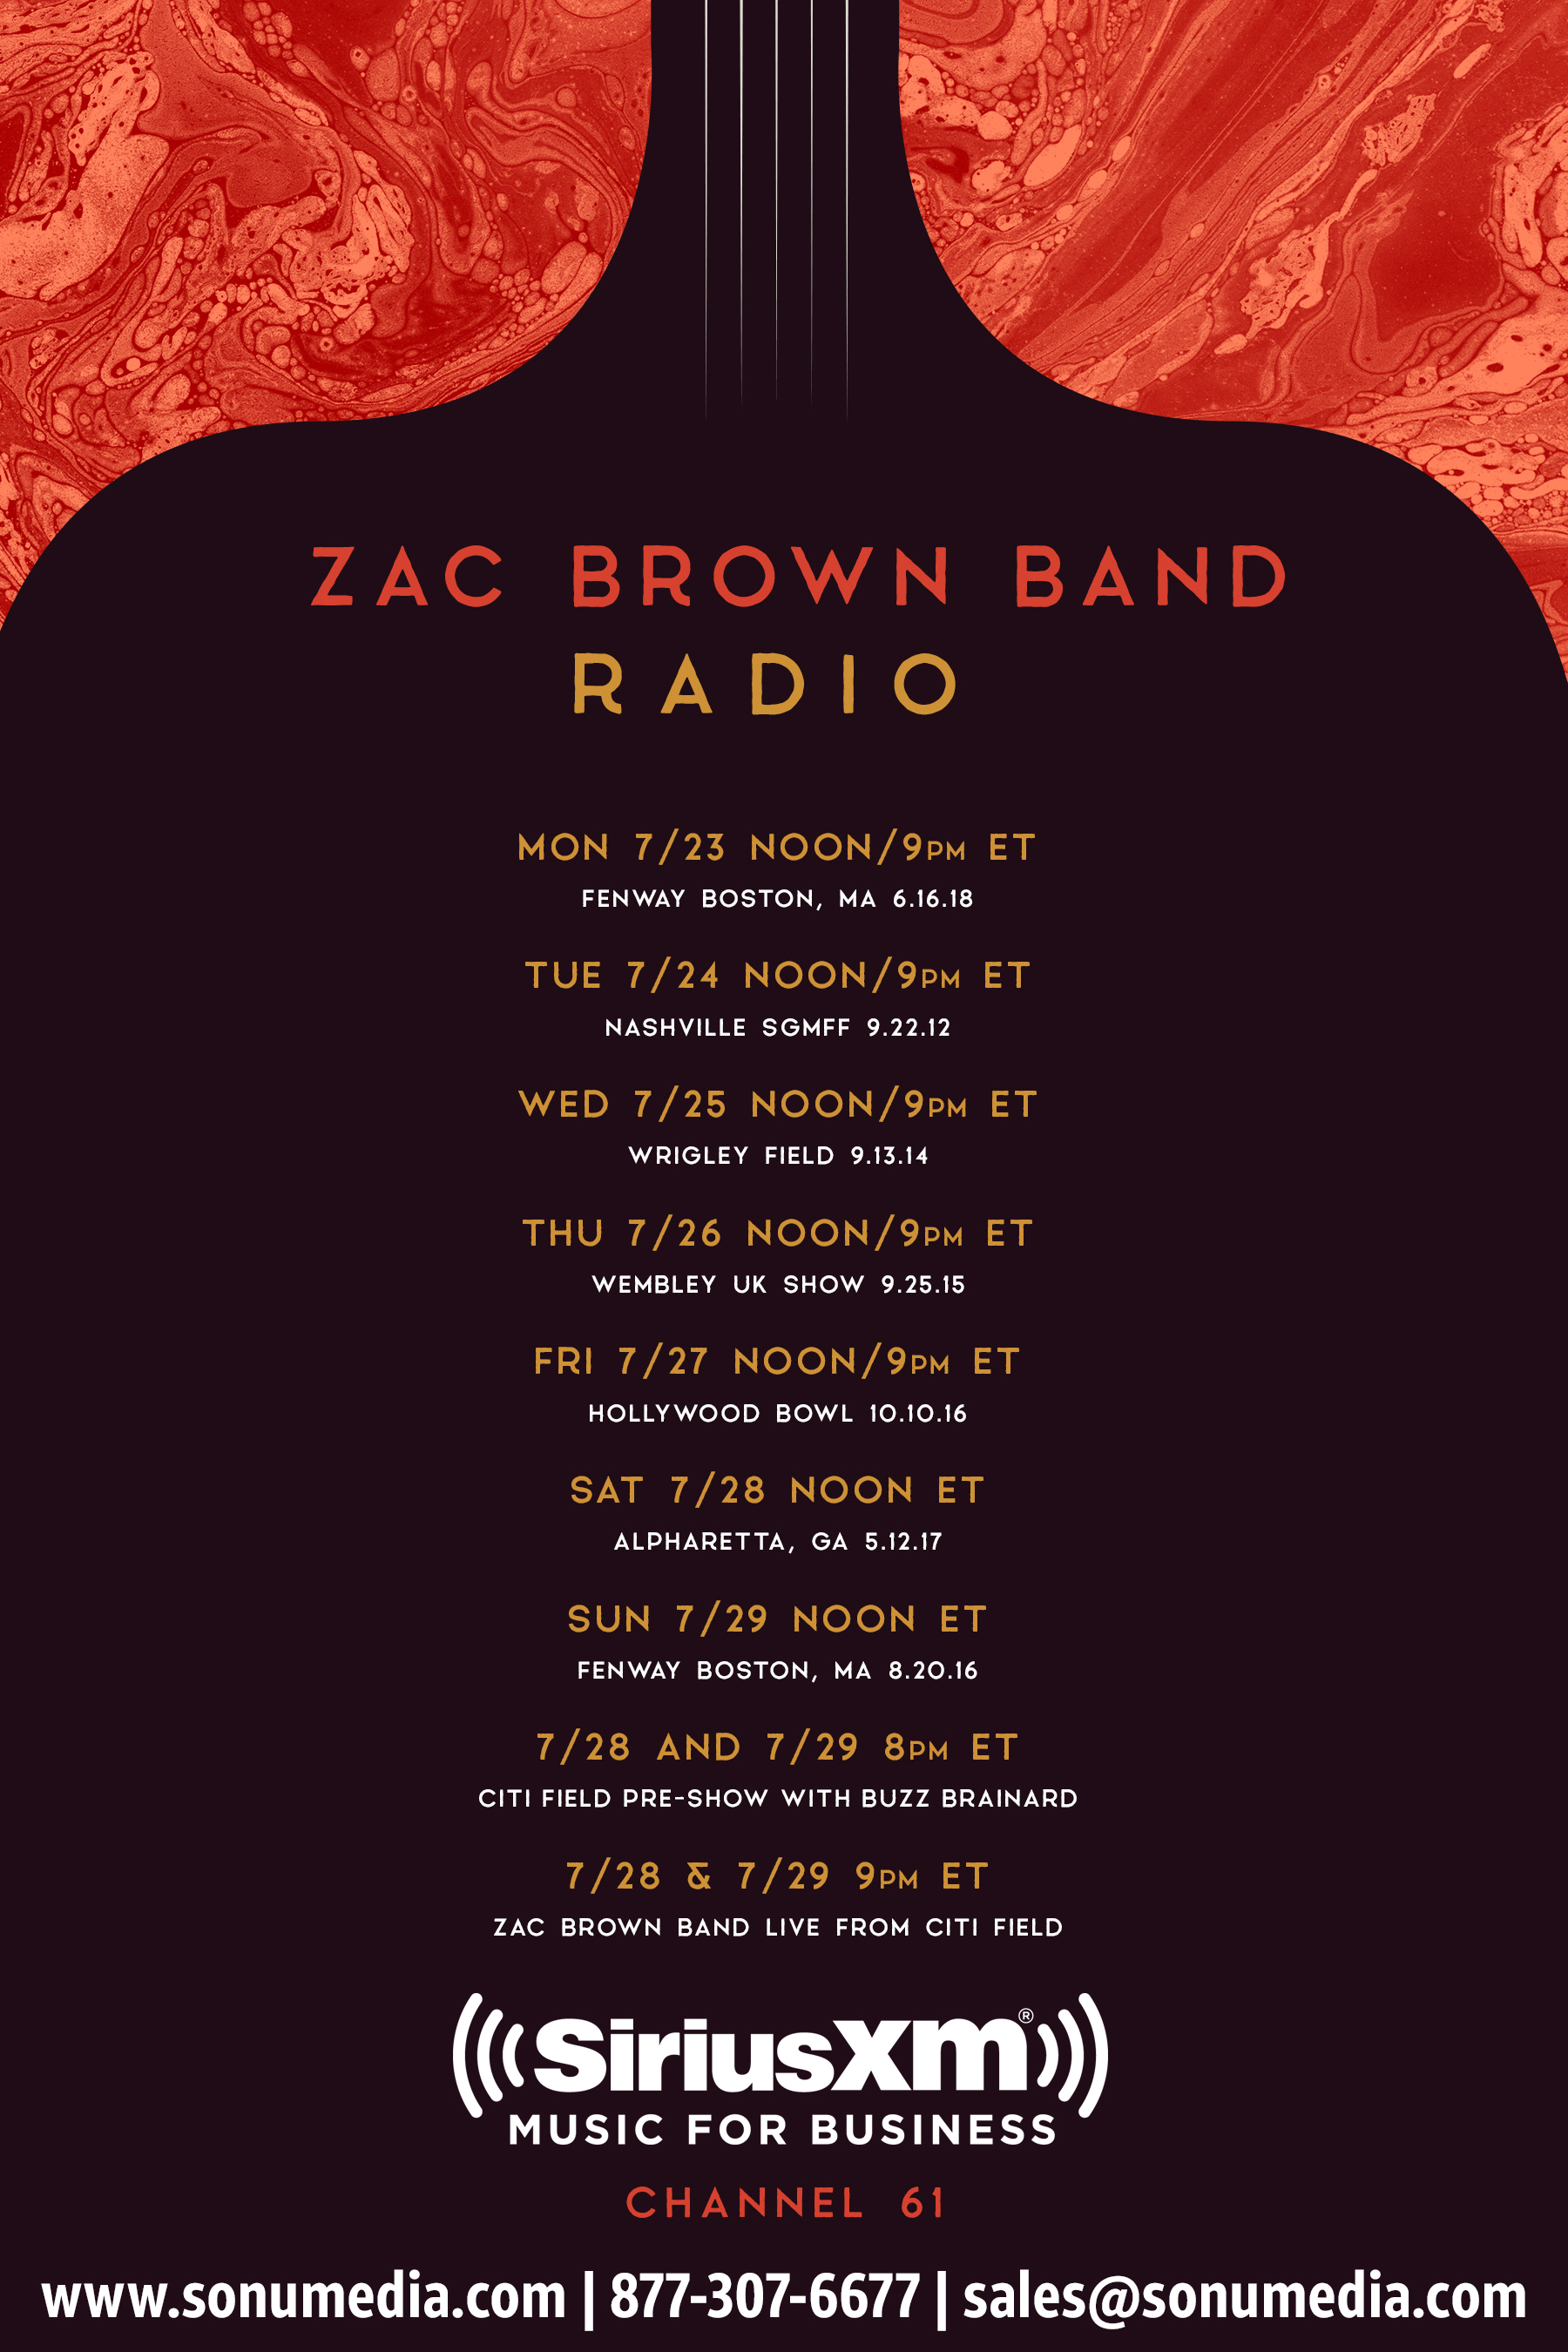 SiriusXM Zac Brown Band Live Y2Kountry 2018 Music for Business